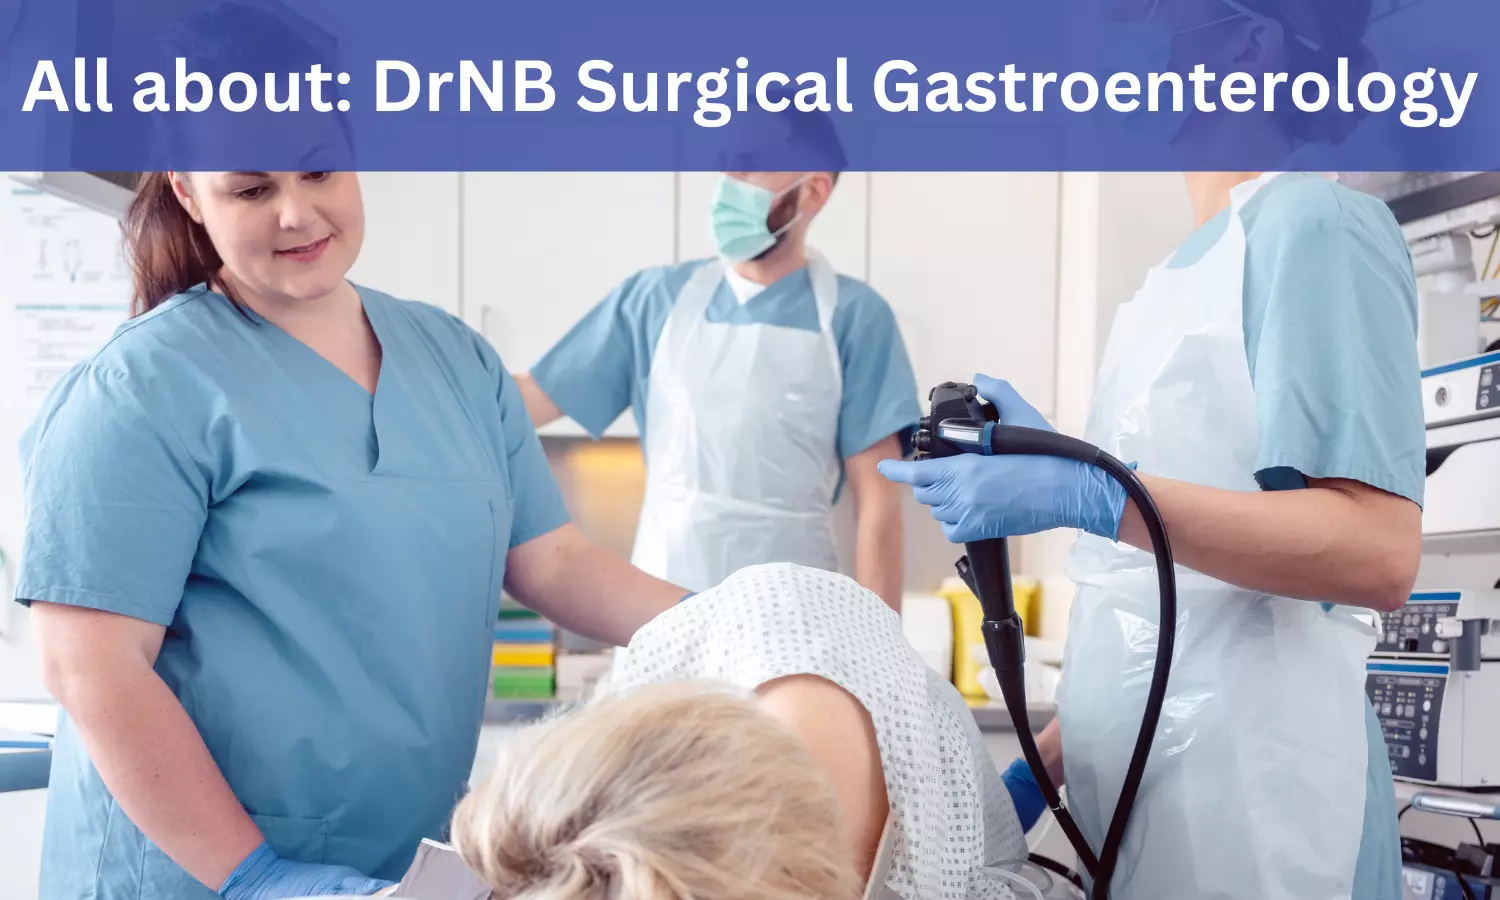 DrNB Surgical Gastroenterology: Admissions, Medical Colleges, Eligibility Criteria, fee details here